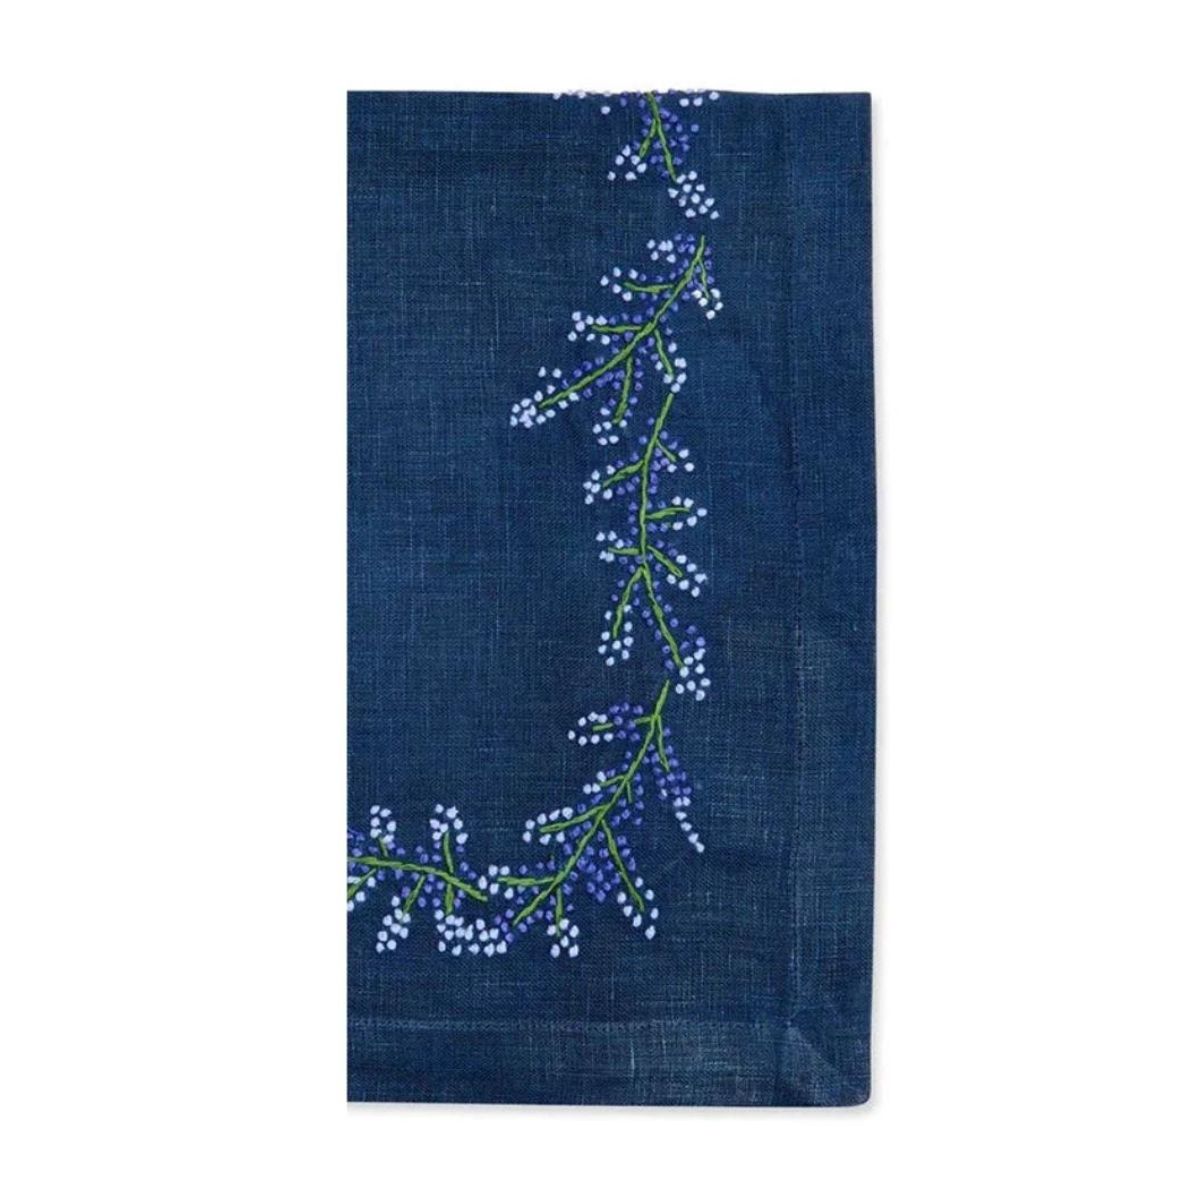 Floral Branch Embroidery Napkin-Bespoke Designs